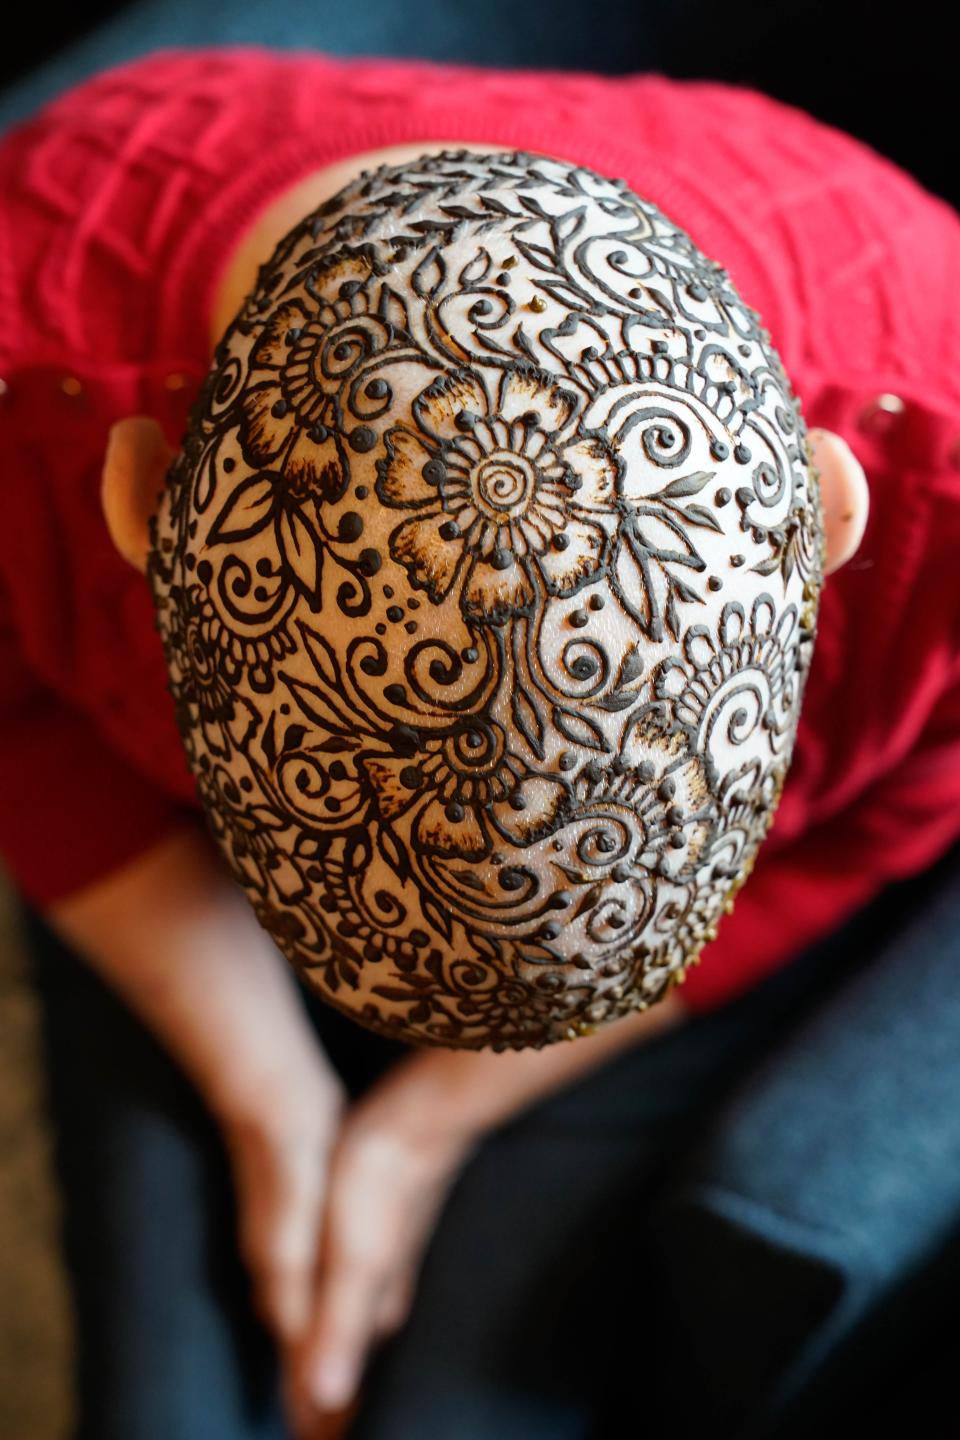 The finished henna crown on Bernice Schwartzman's head begins the drying process Friday morning. The artist, Vidhi Heiland, first started doing henna artwork as a child and recently made it into her business, Essential Henna.